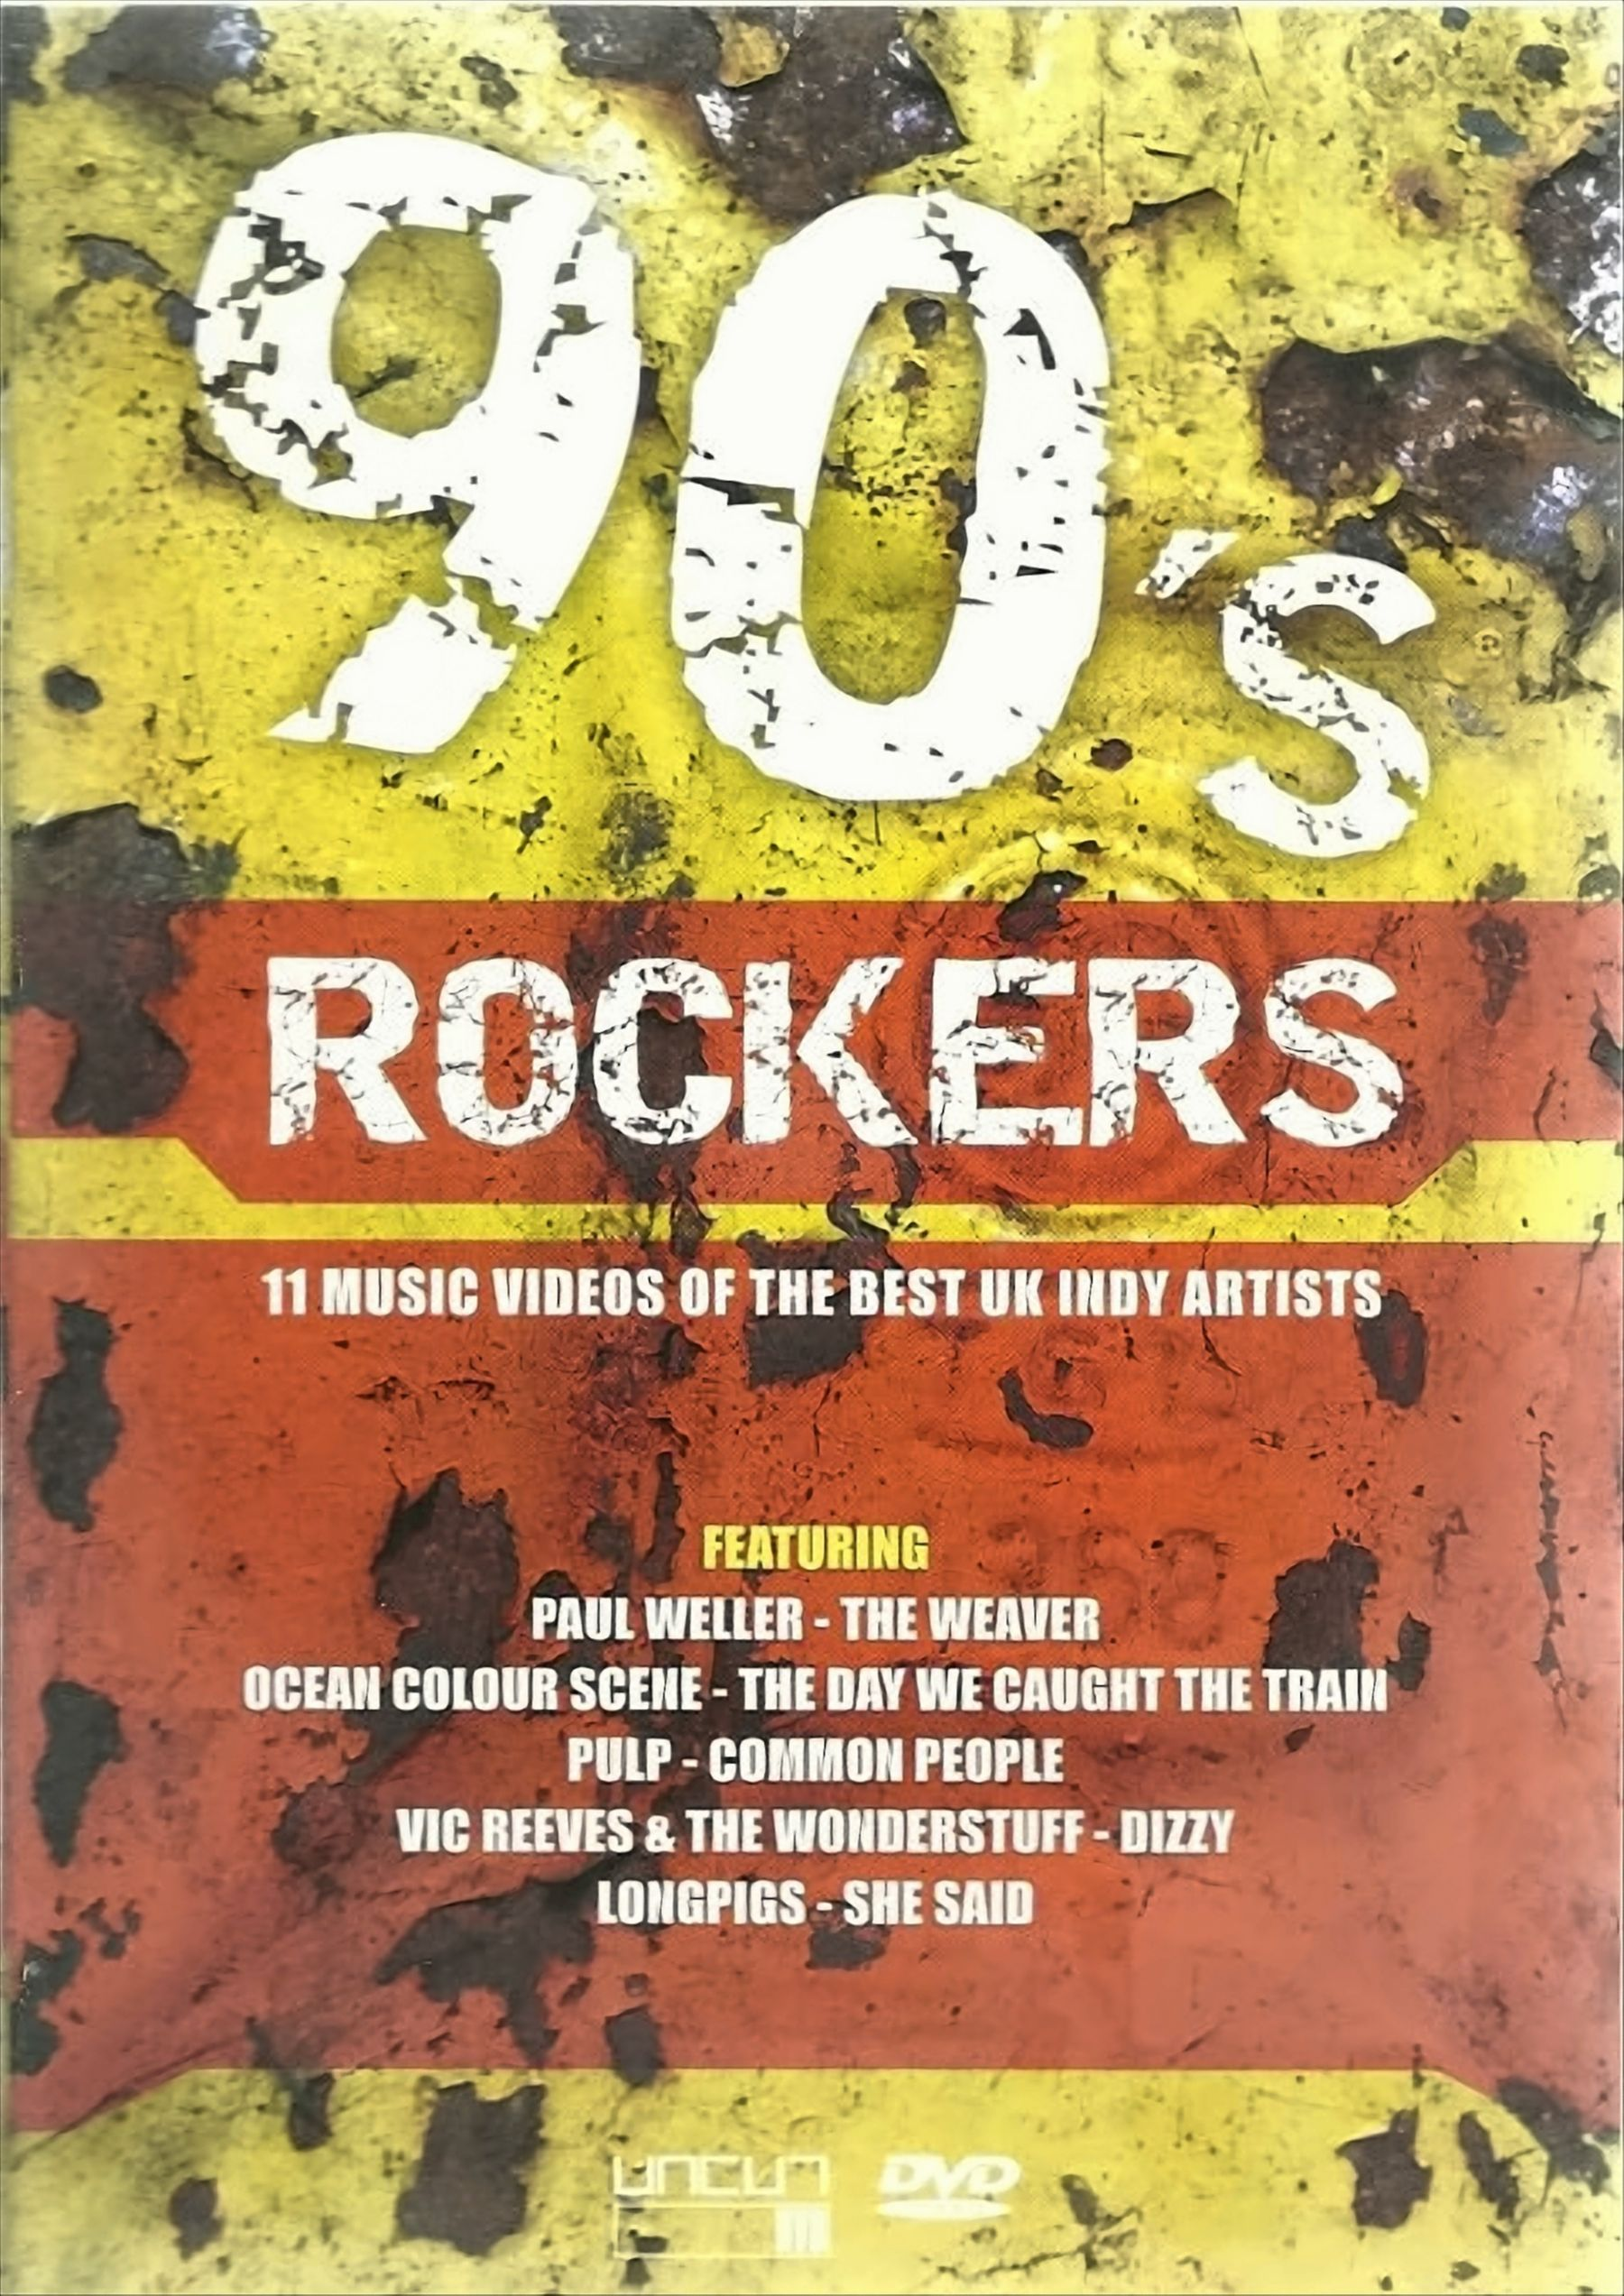 90s ROCKERS indy of 11 the DVD videos best UK Music artists